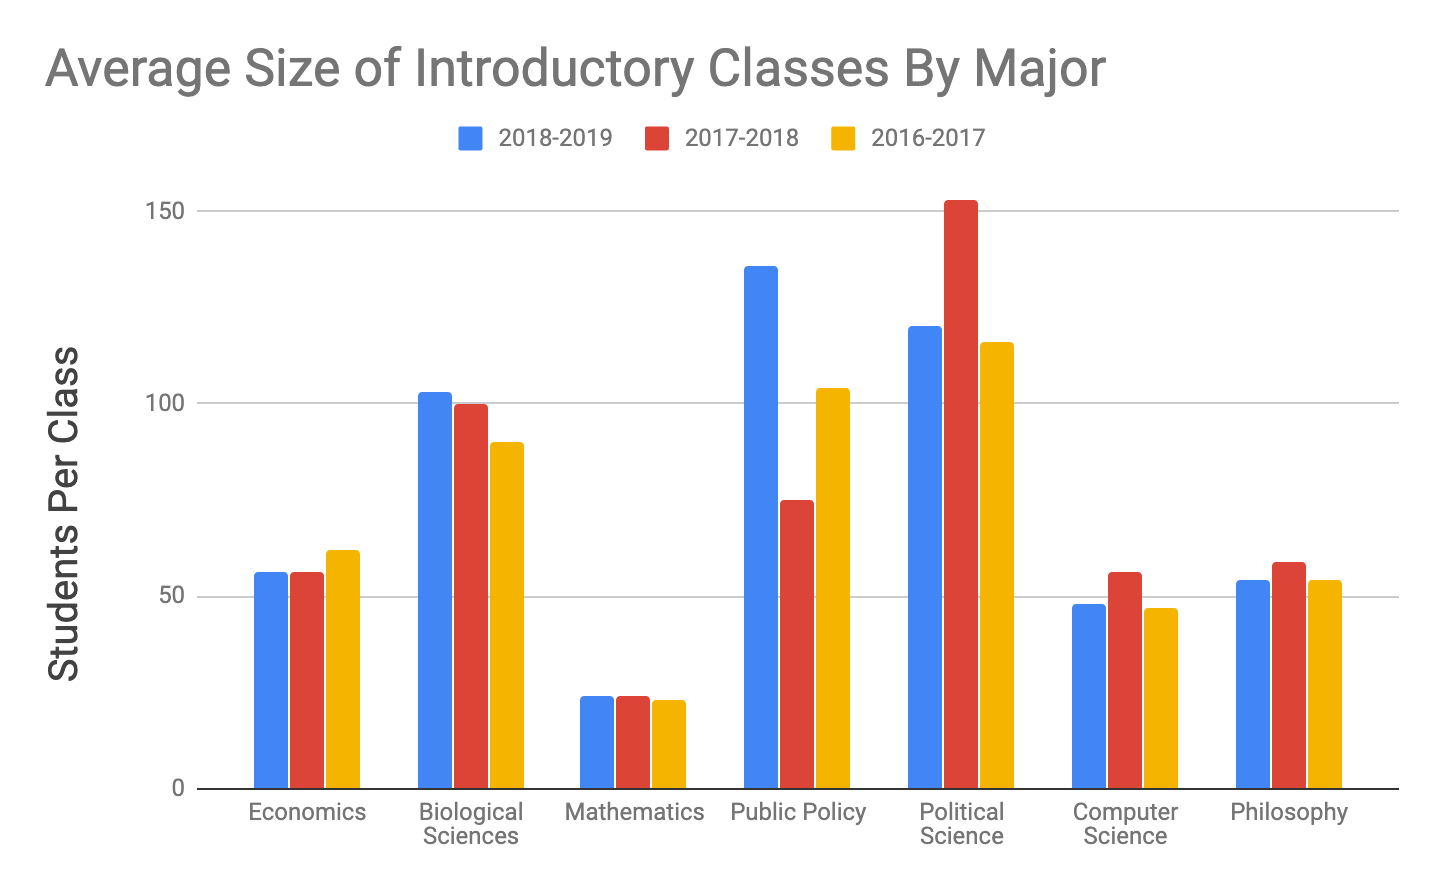 Average class sizes of introductory sequence classes for the eight largest majors over the last three years.